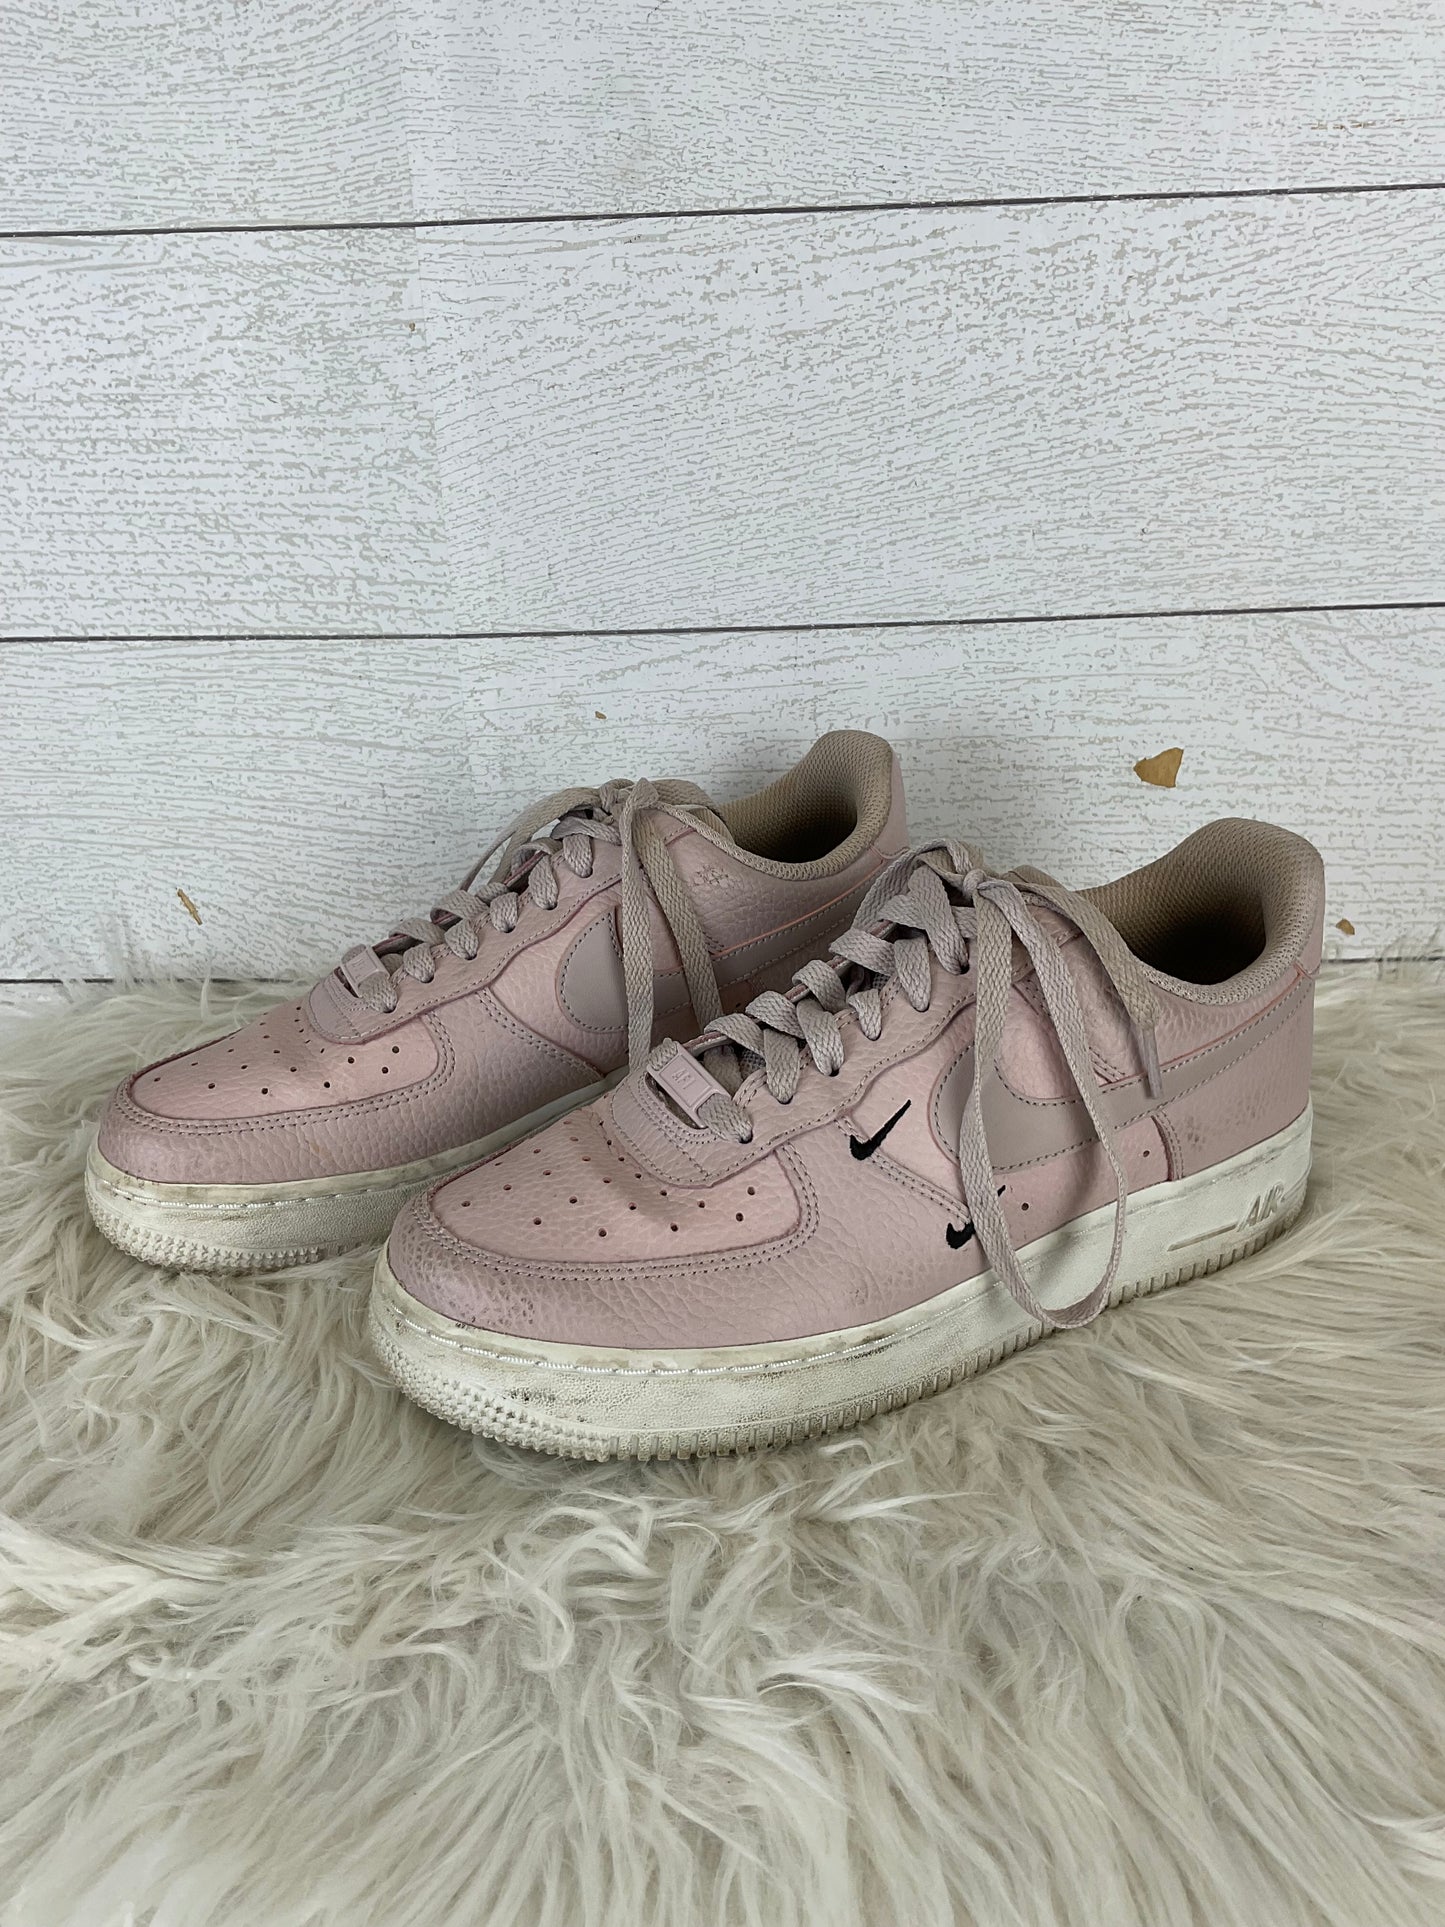 Shoes Sneakers By Nike  Size: 8.5